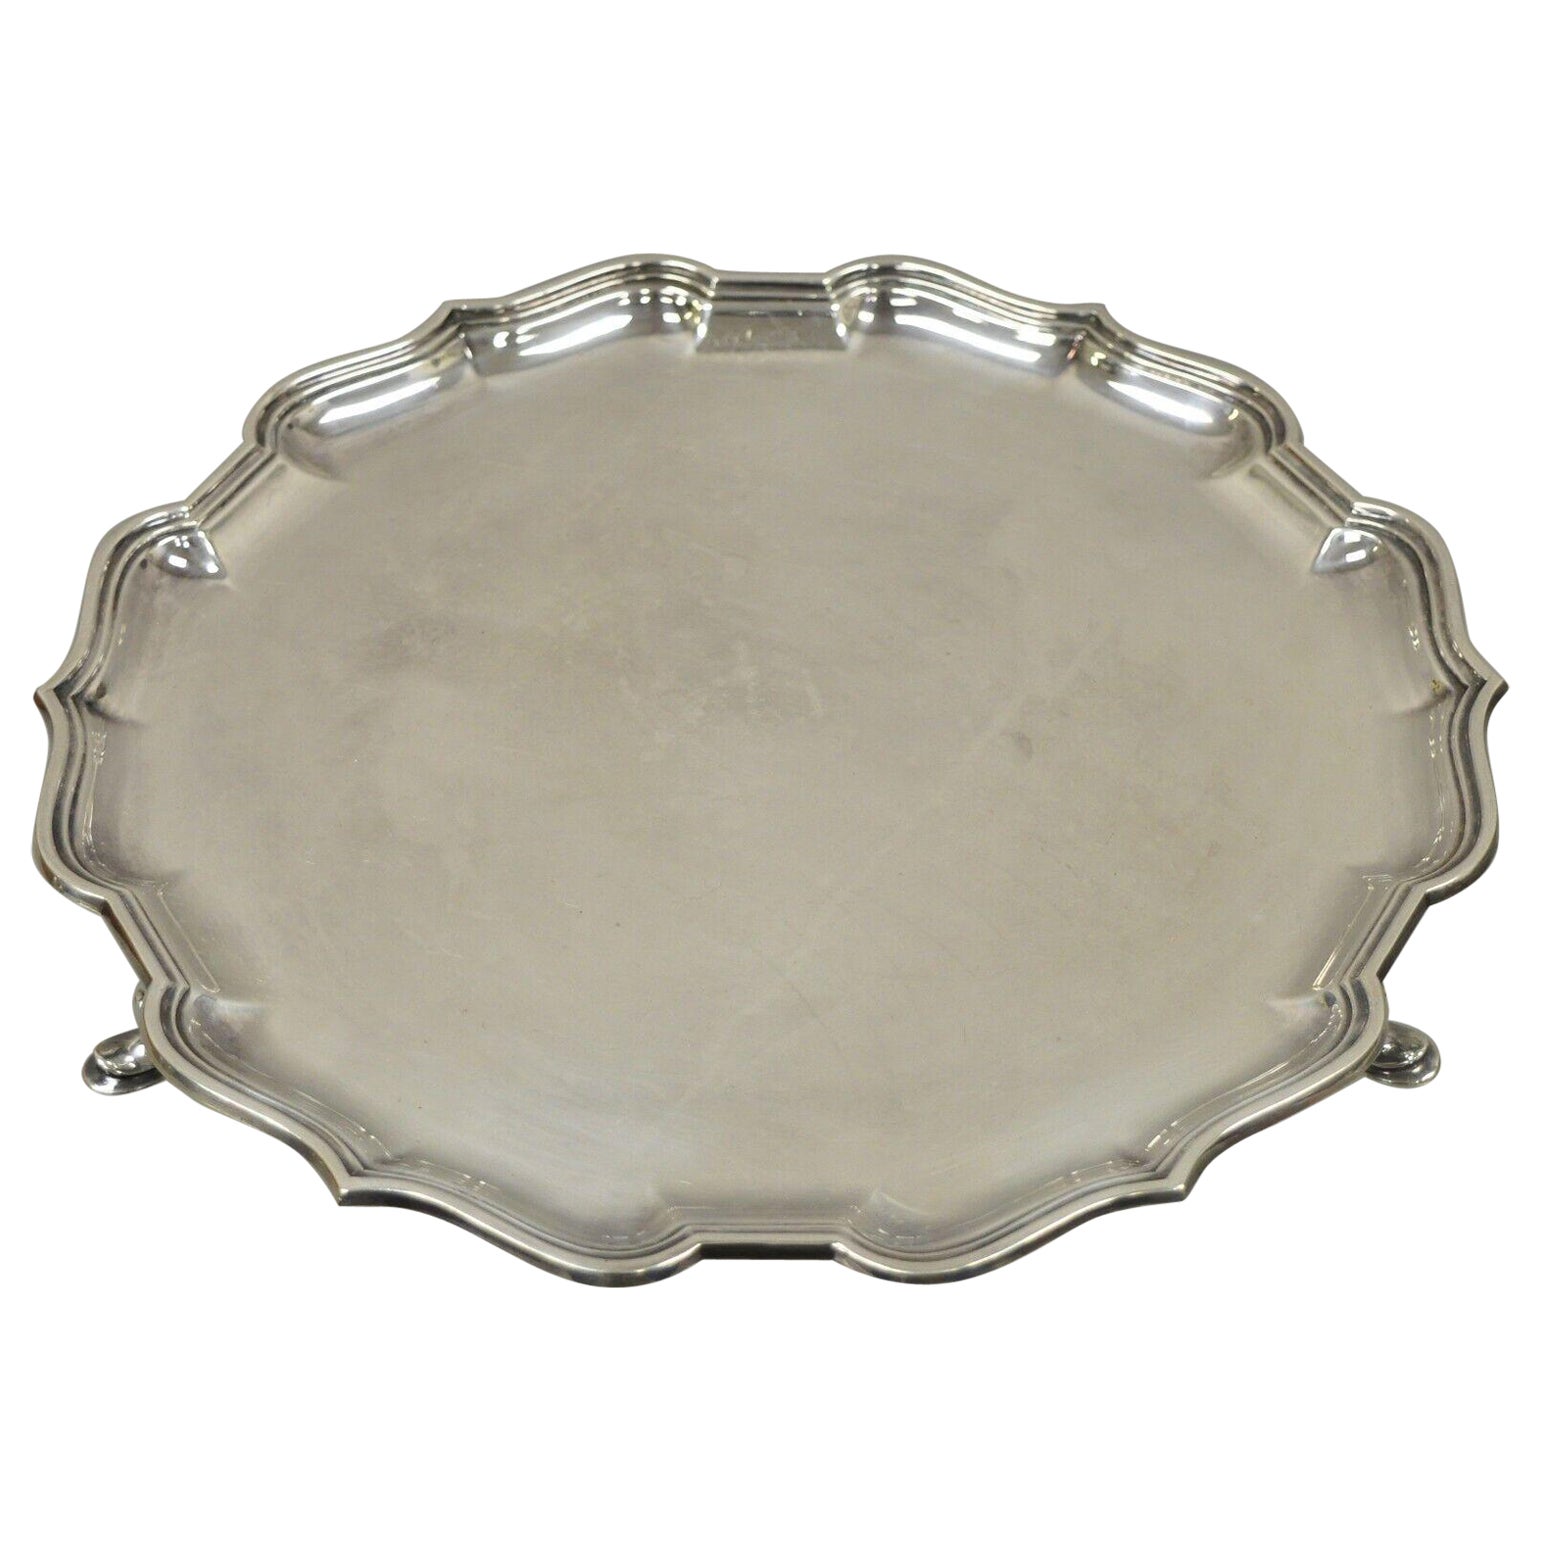 Roberts & Belk England Silver Plate Regency Square Footed Scalloped Tray